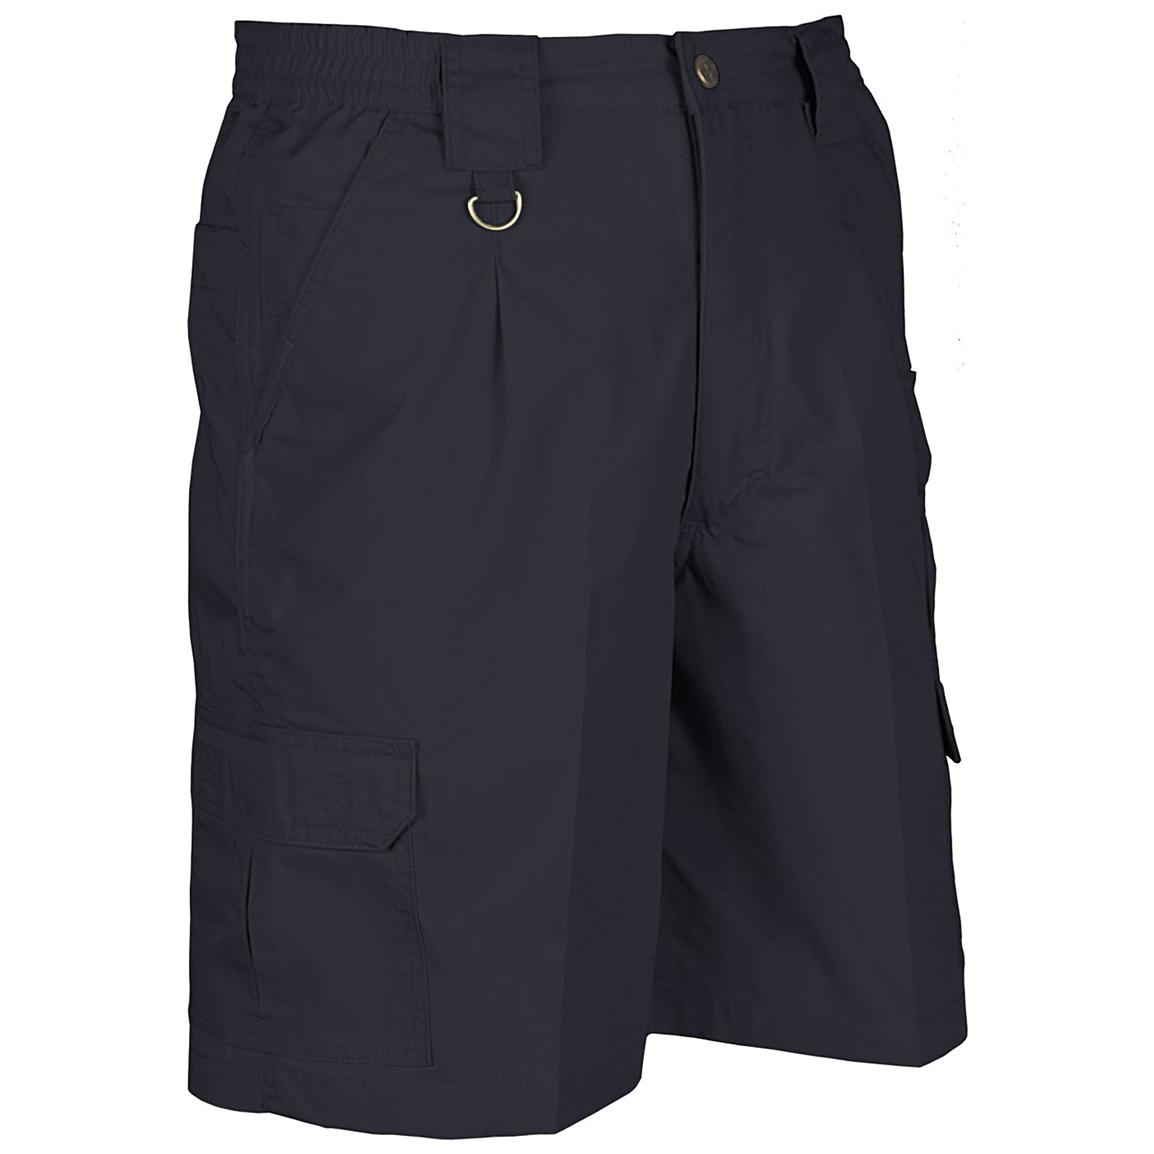 Guide Gear Men's Outdoor Cargo Shorts - 578129, Shorts at Sportsman's Guide